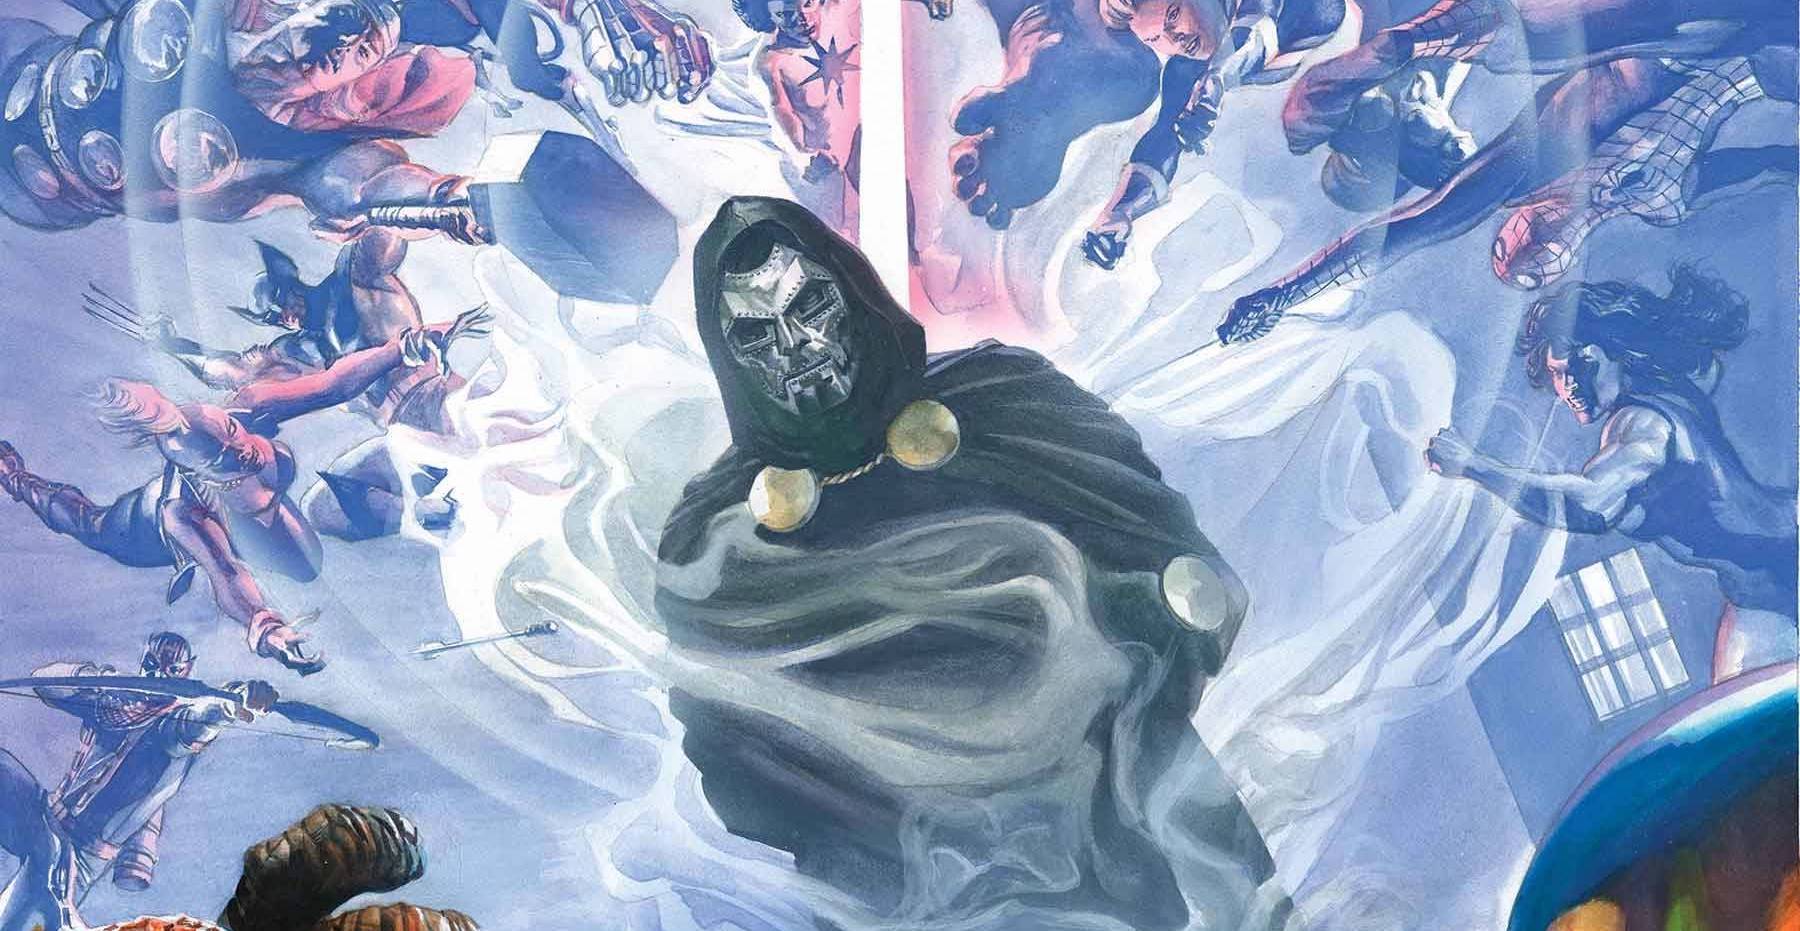 'Fantastic Four' #7 celebrates the 700th milestone issue with Doctor Doom